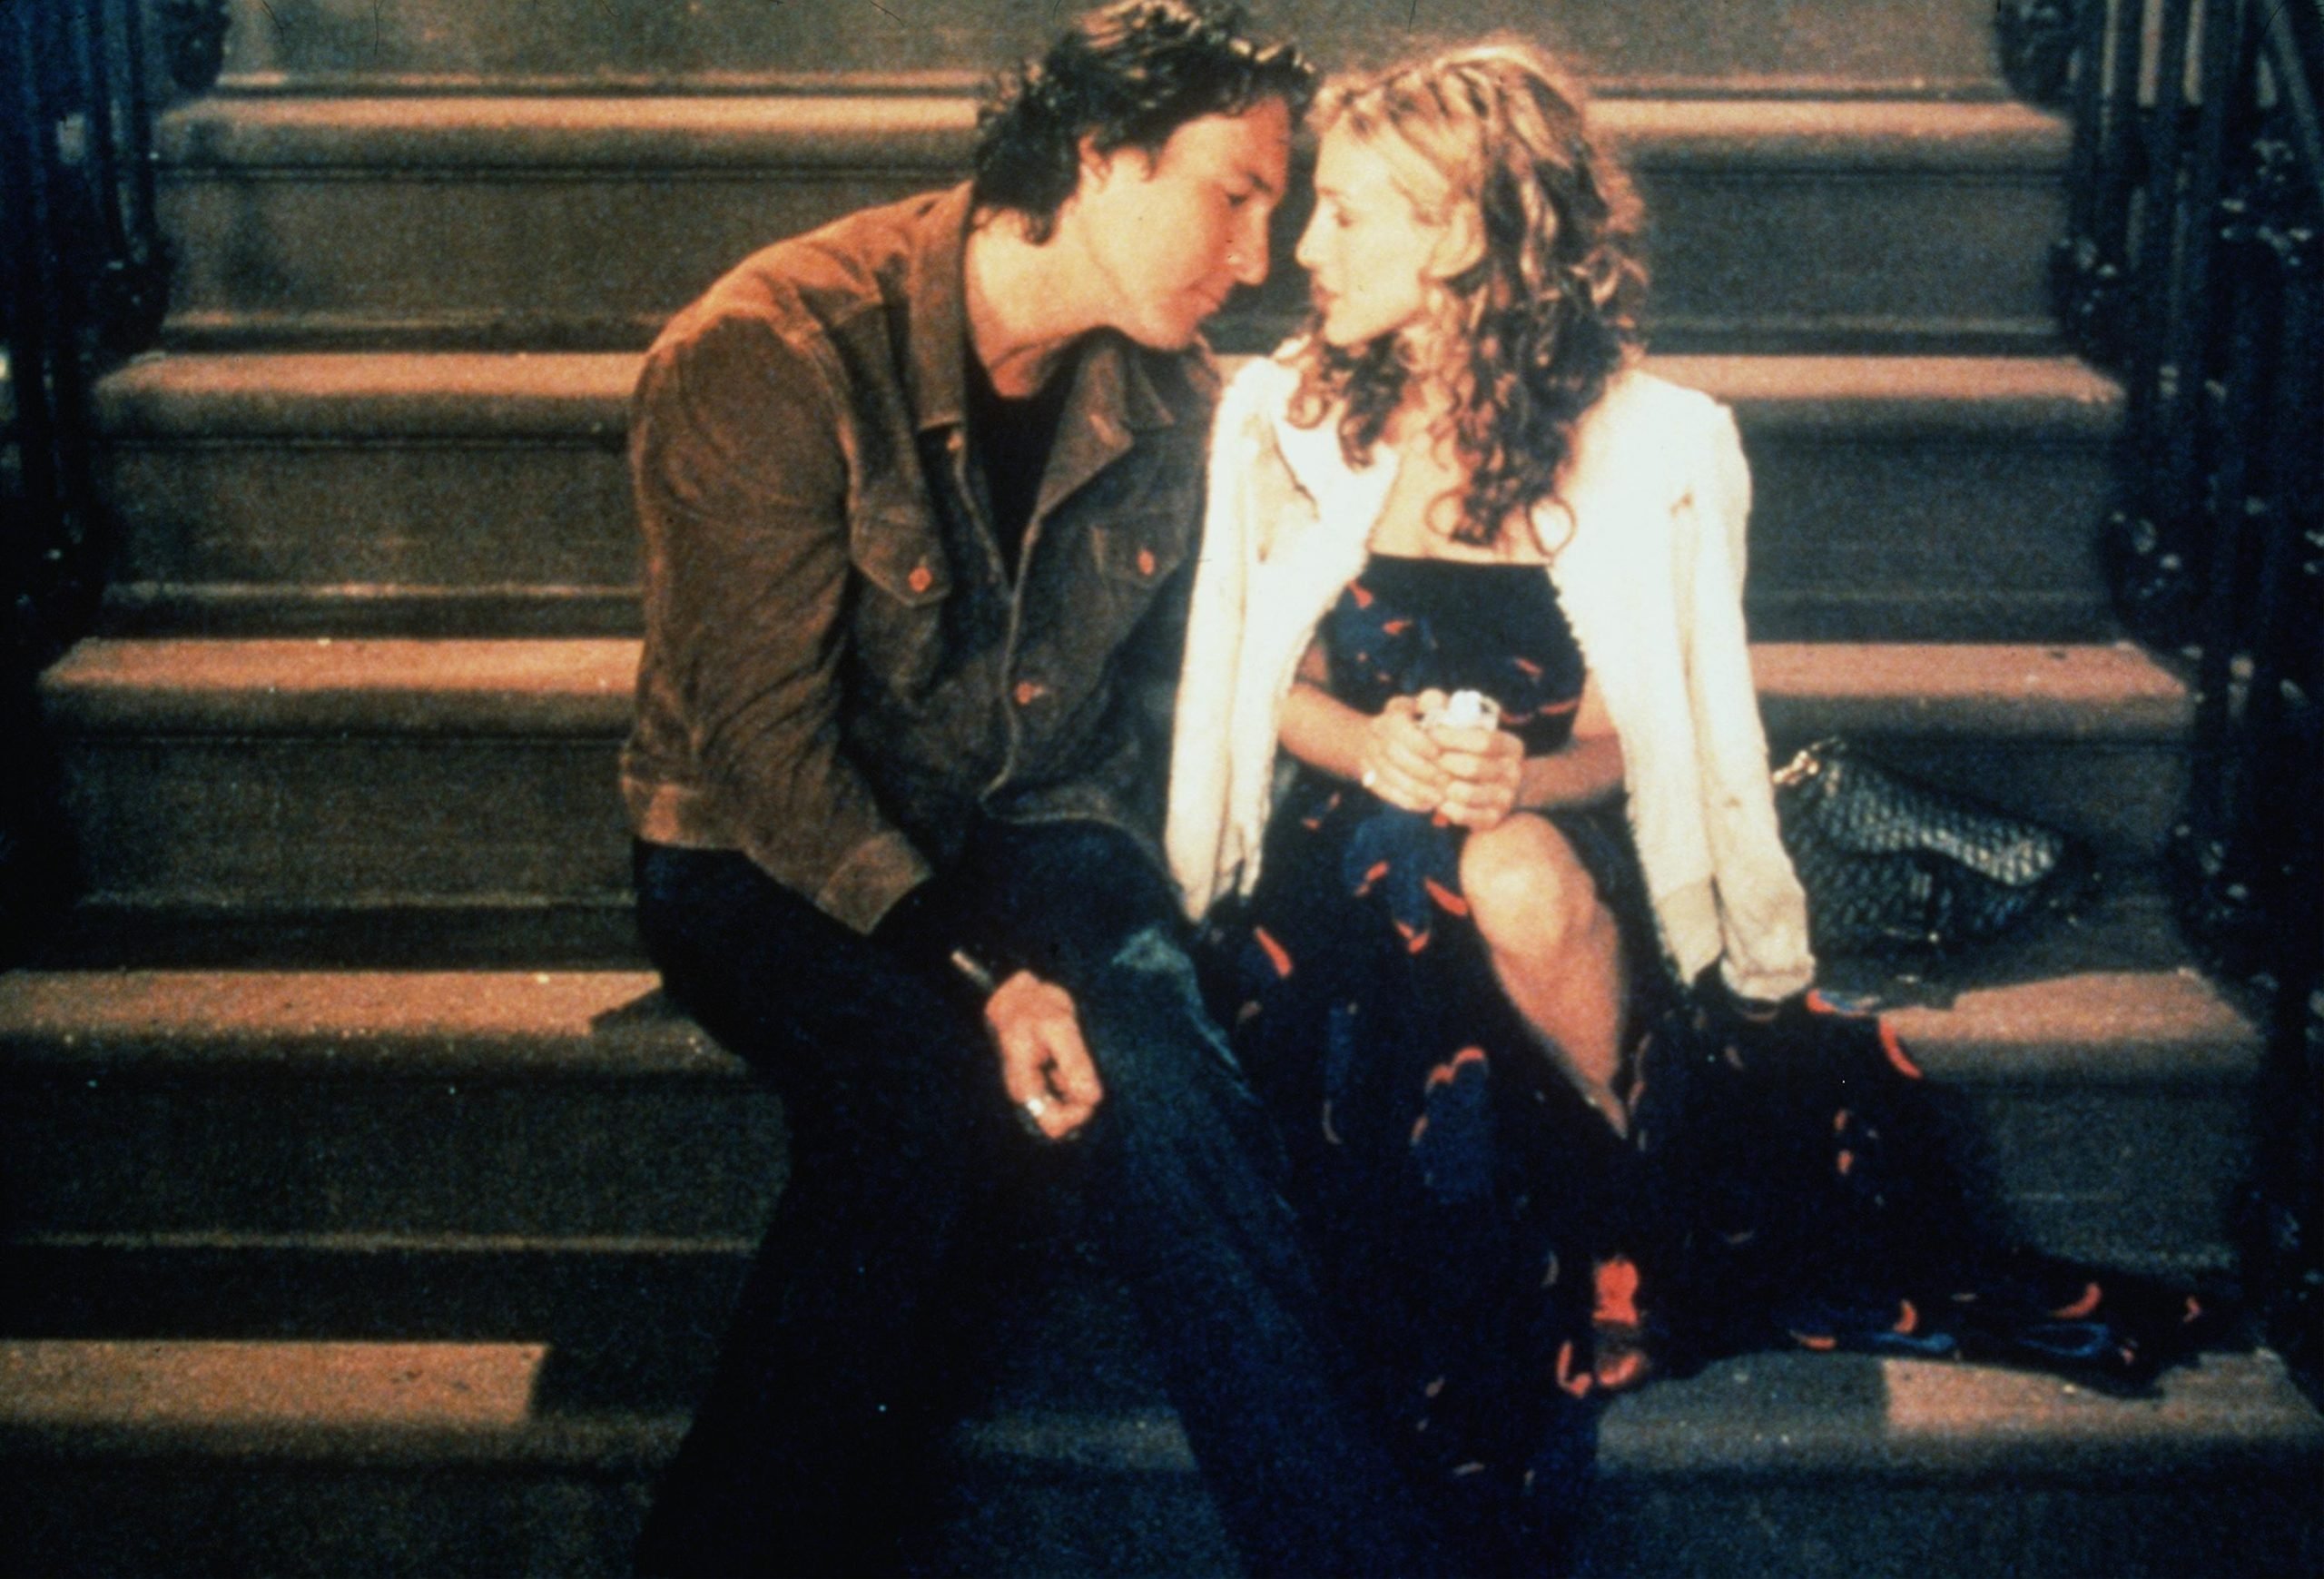 John Corbett as Aidan Shaw and Sarah Jessica Parker as Carrie Bradshaw sit on the steps of her apartment in 'Sex and the City'